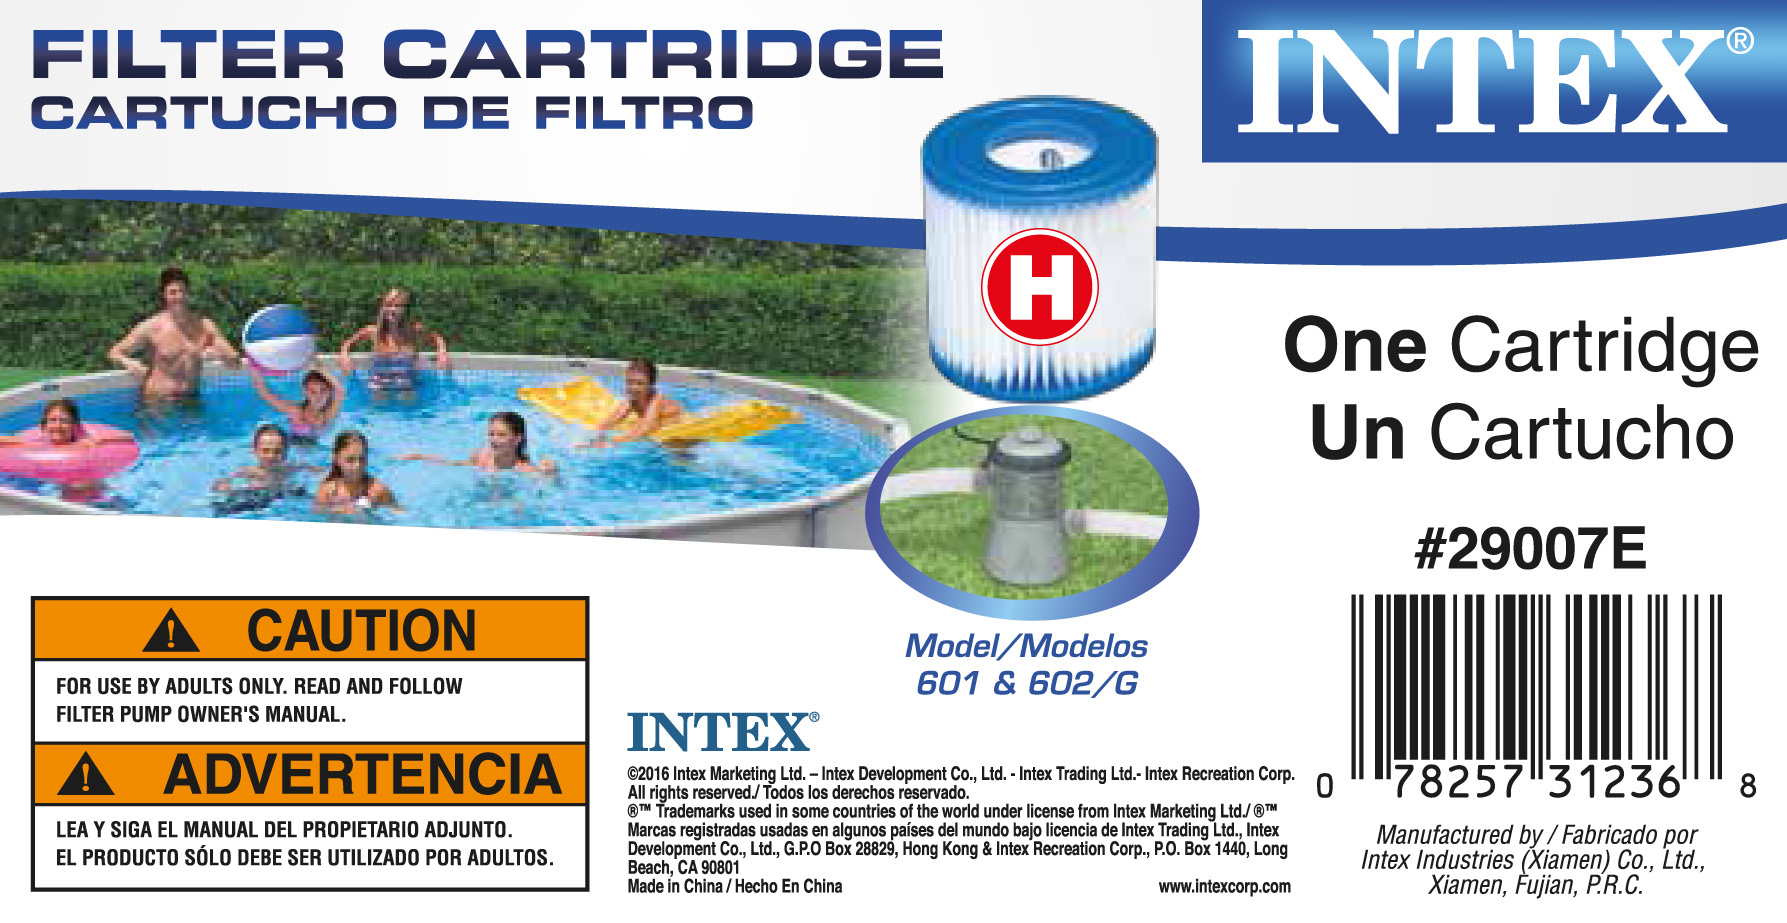 Intex Type H Easy Set Filter Cartridge Replacement for Swimming Pools 29007E